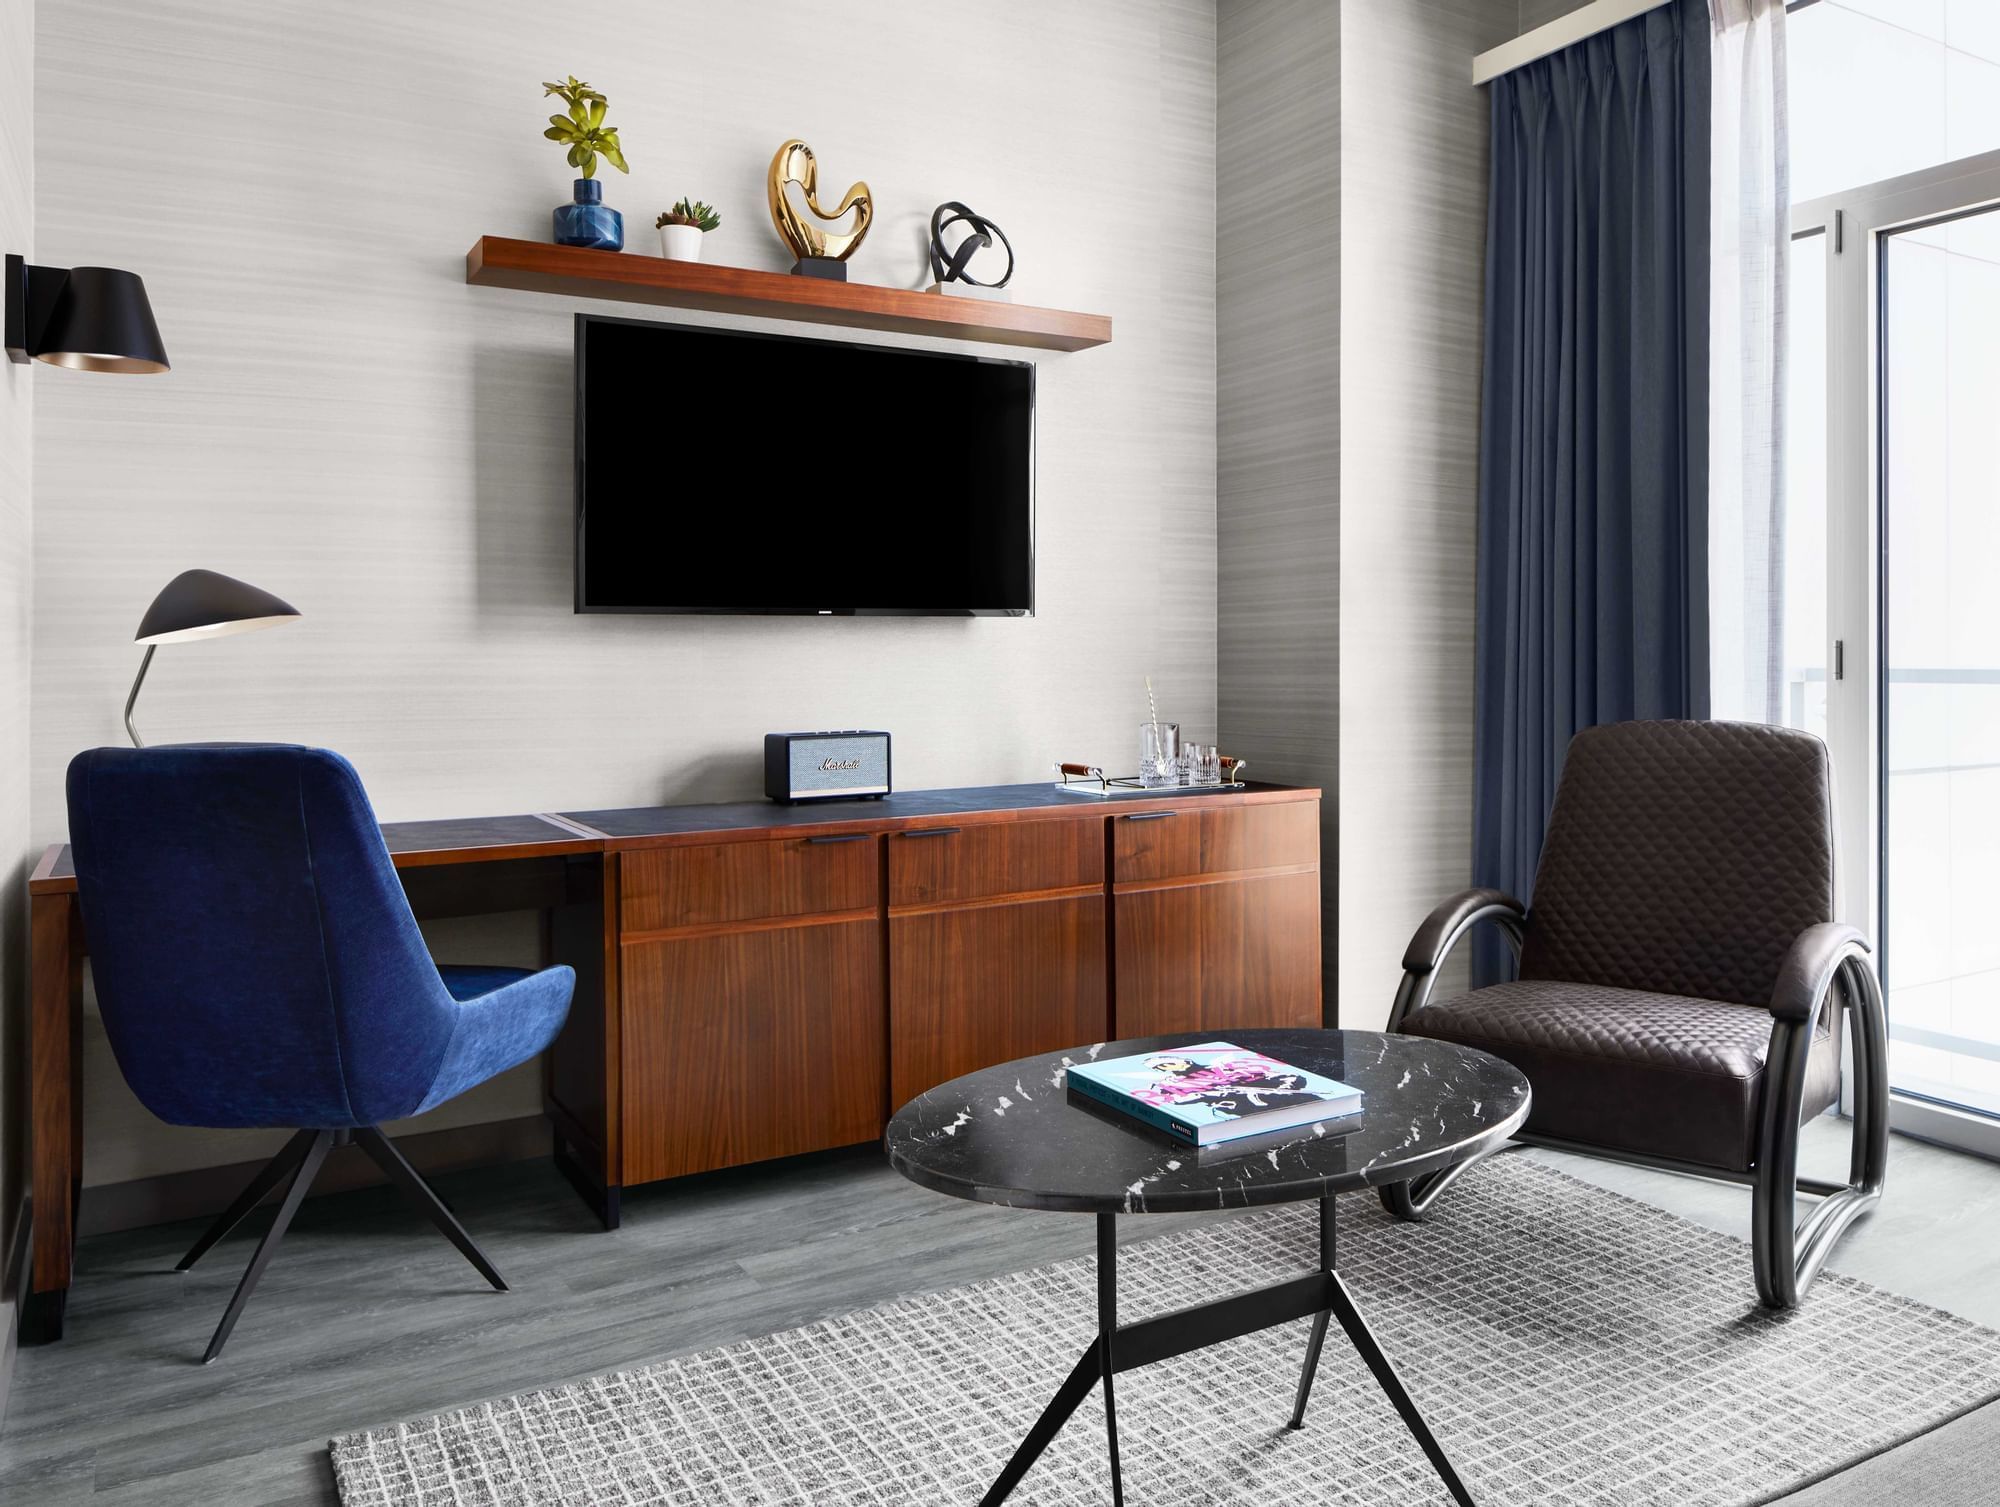 Suite living room with desk chairs and TV